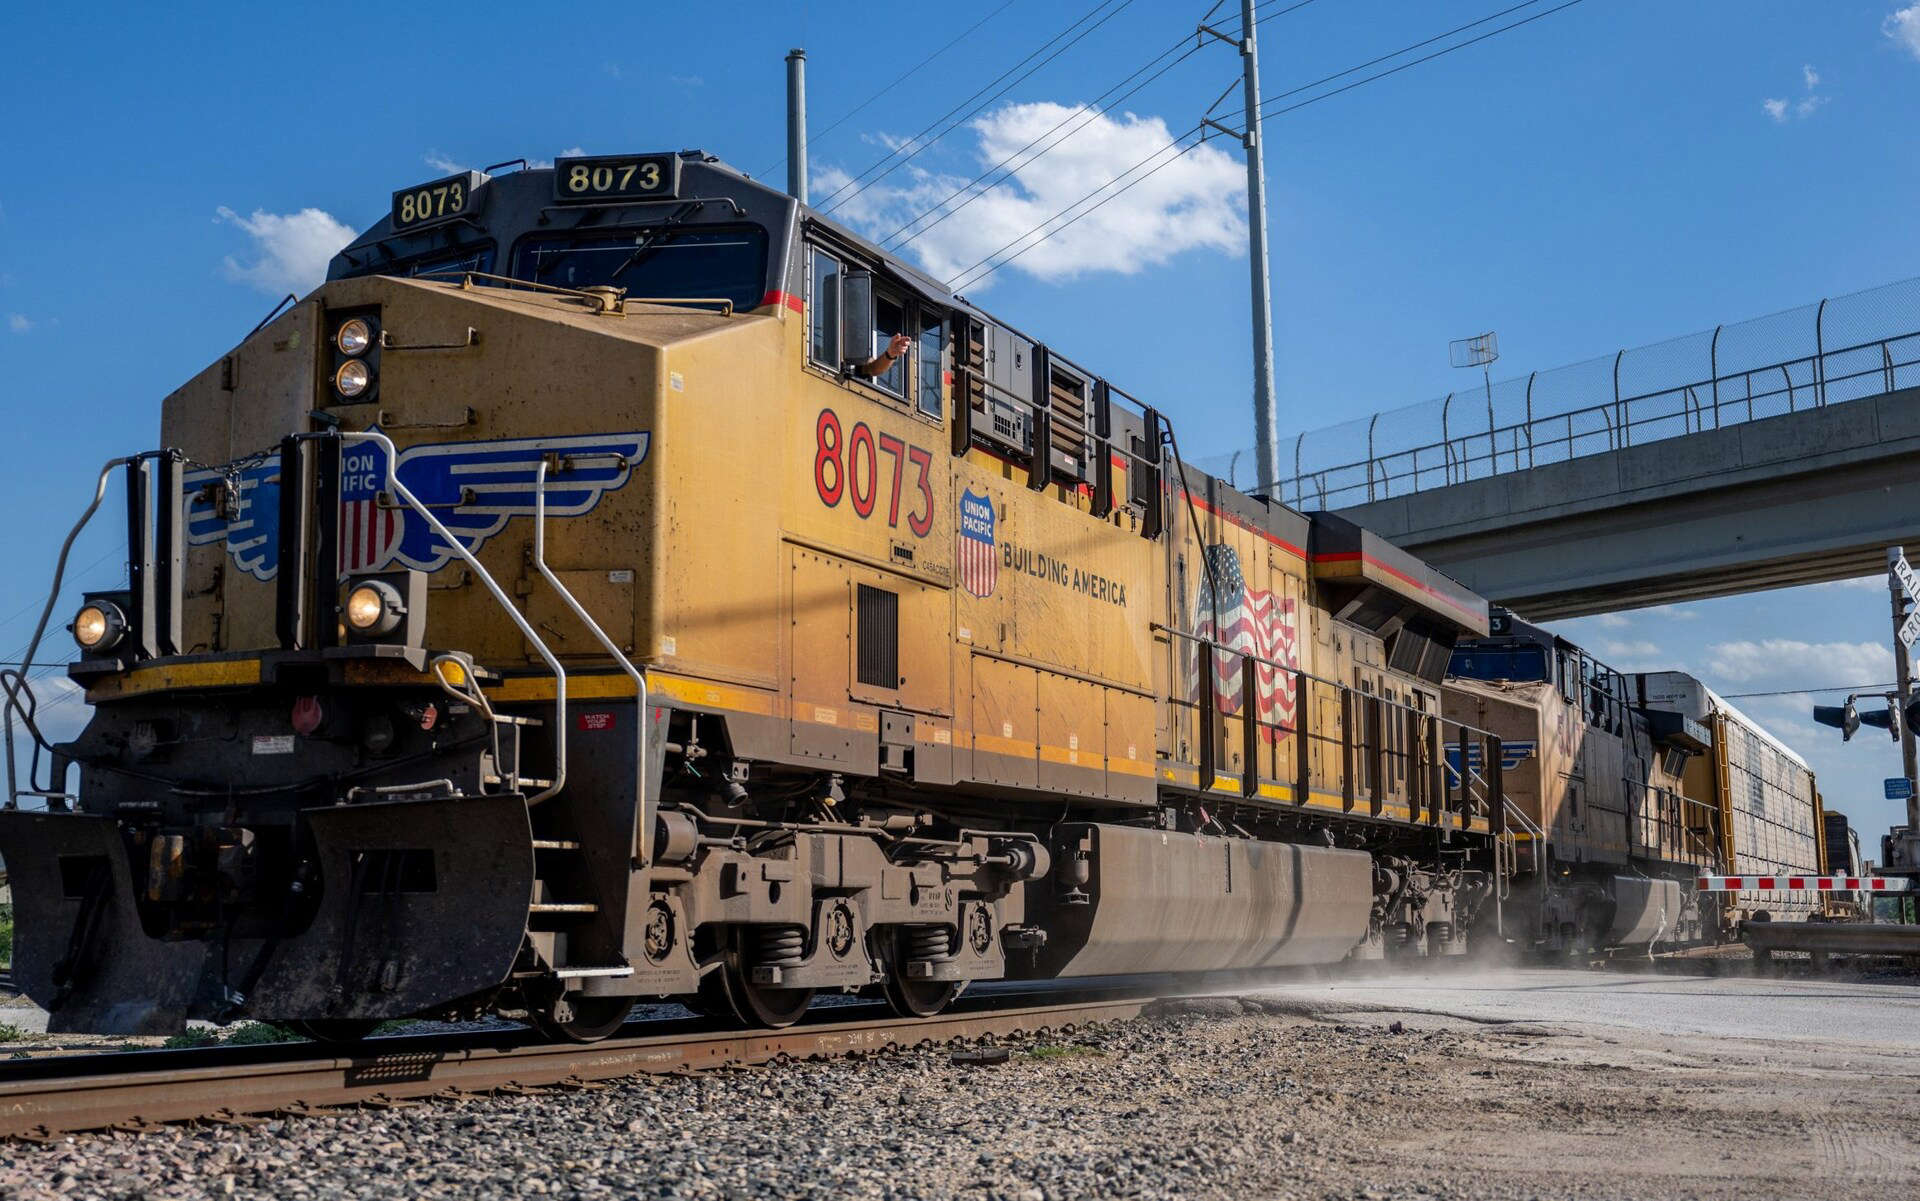 Mile-long US freight trains face ban after baby death